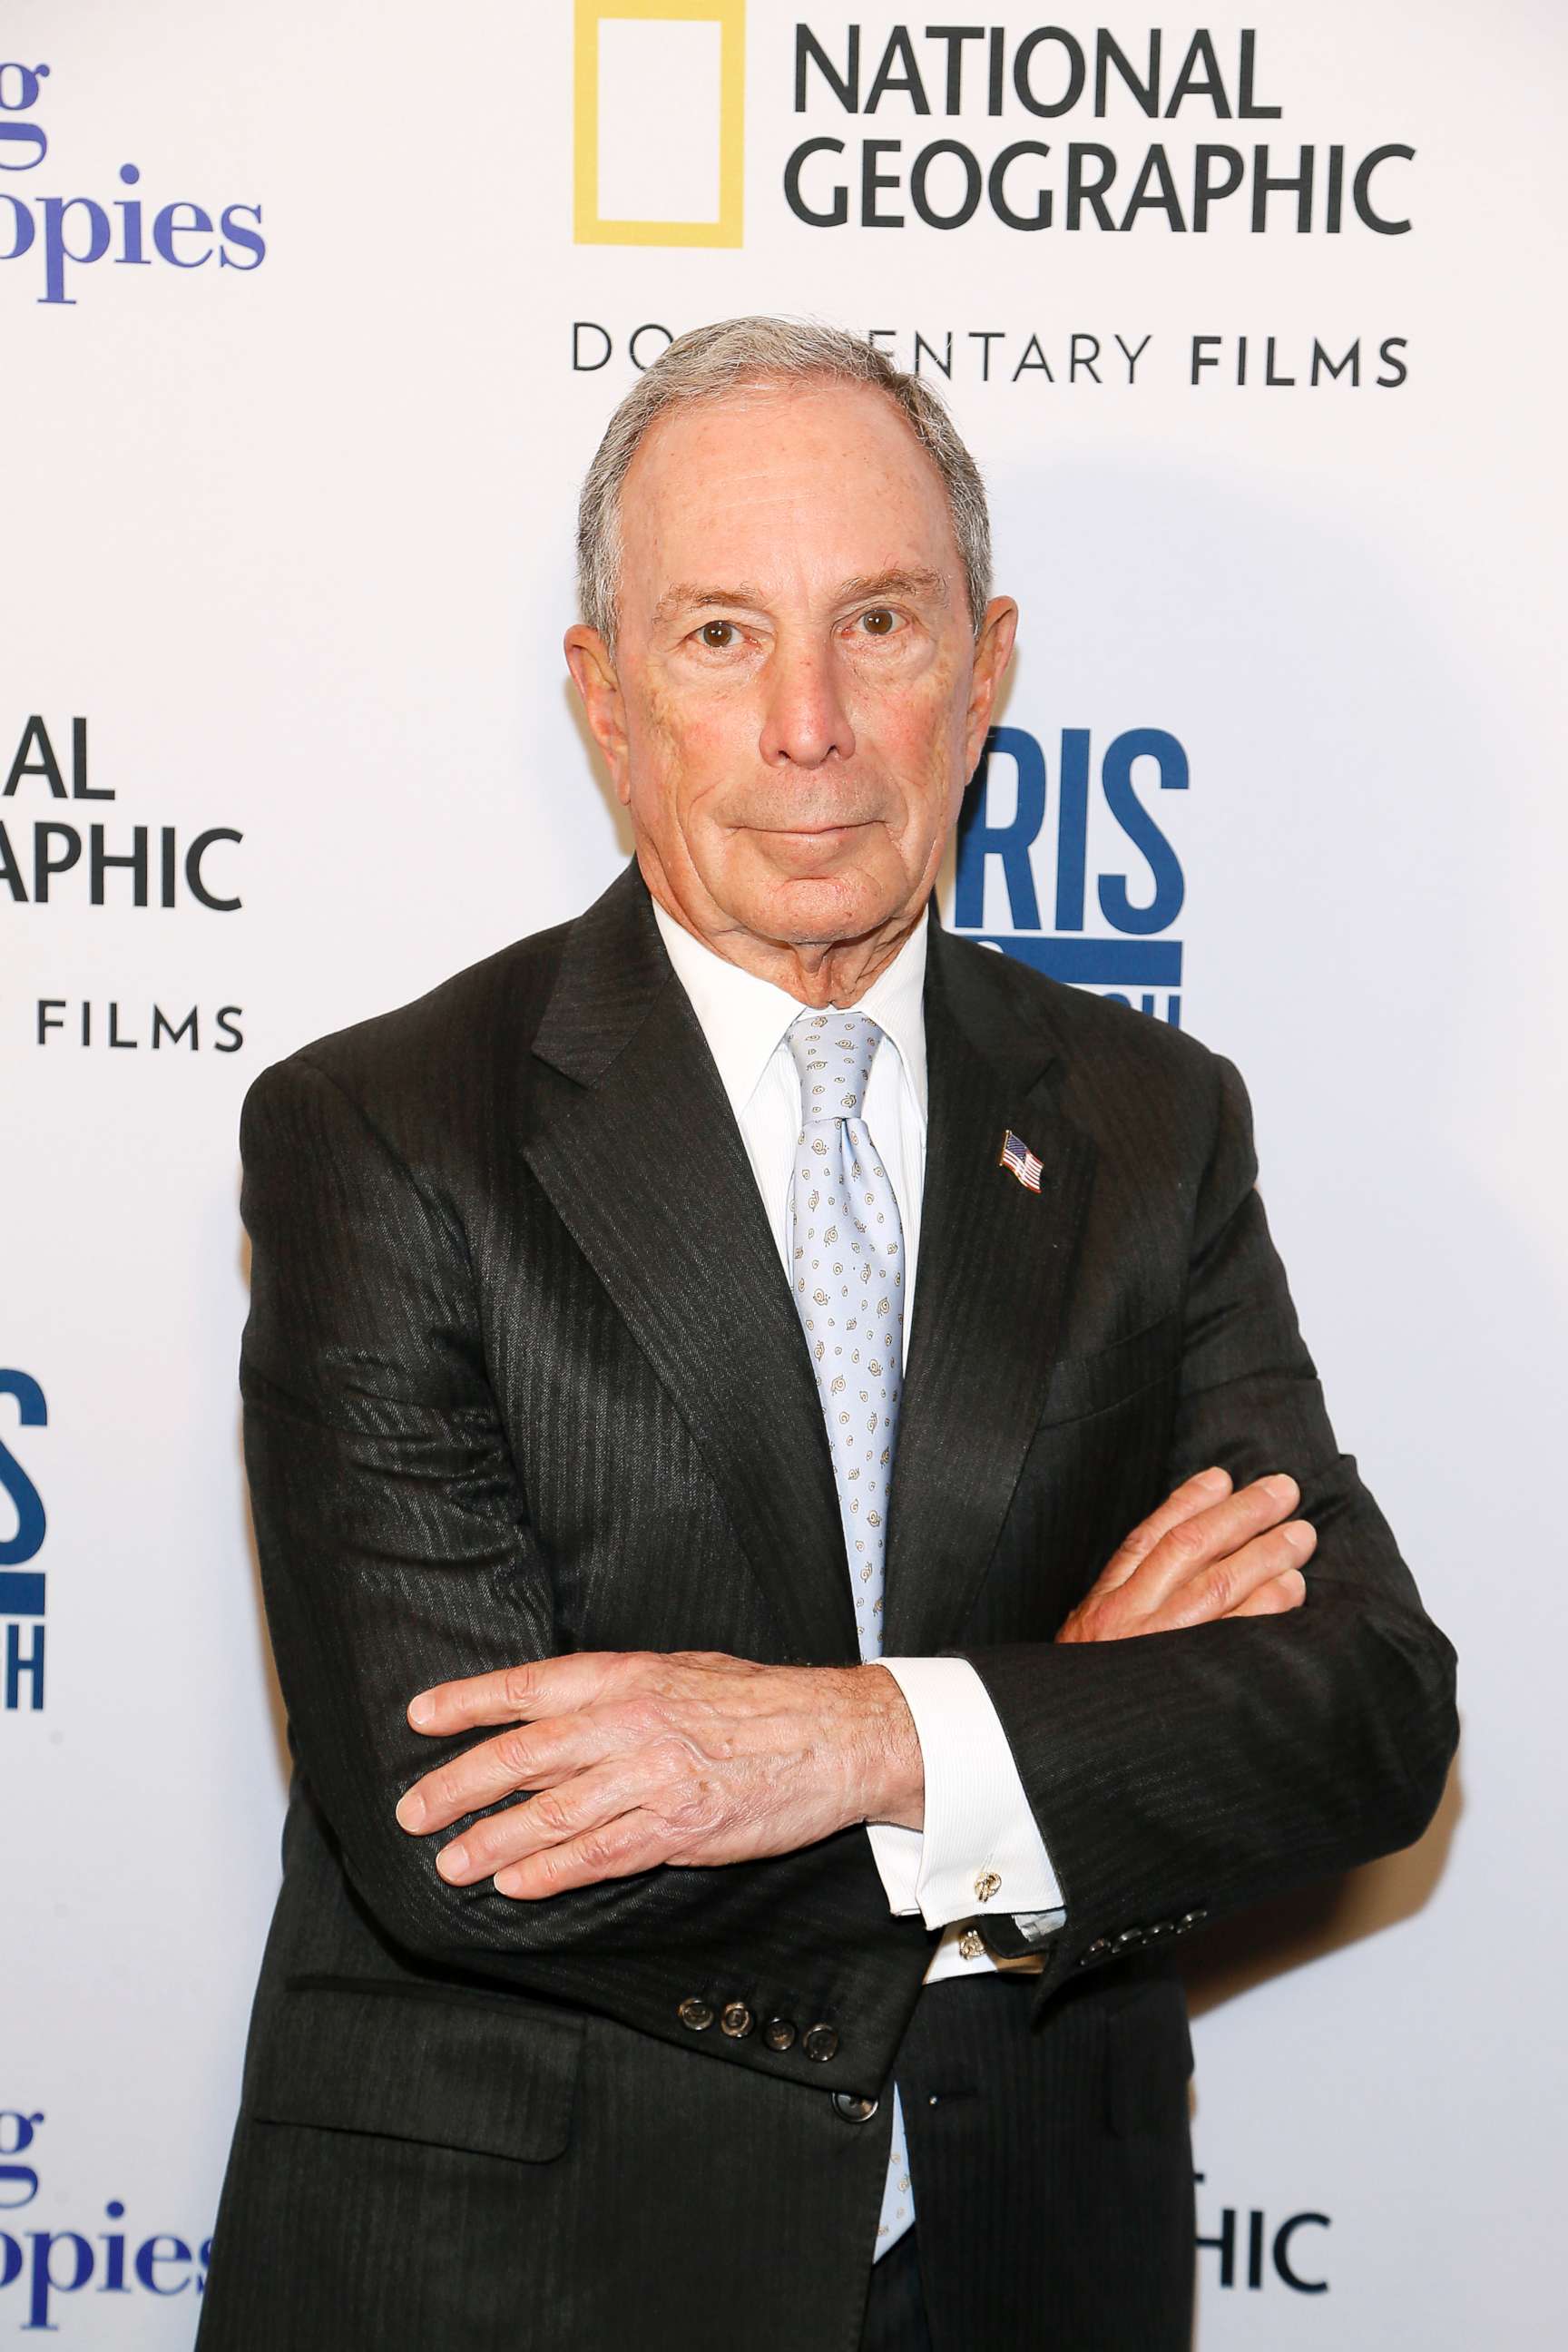 PHOTO: Michael Bloomberg attends the "Paris to Pittsburgh" film screening hosted by Bloomberg Philanthropies and National Geographic at National Geographic Headquarters, Feb. 13, 2019 in Washington, DC.